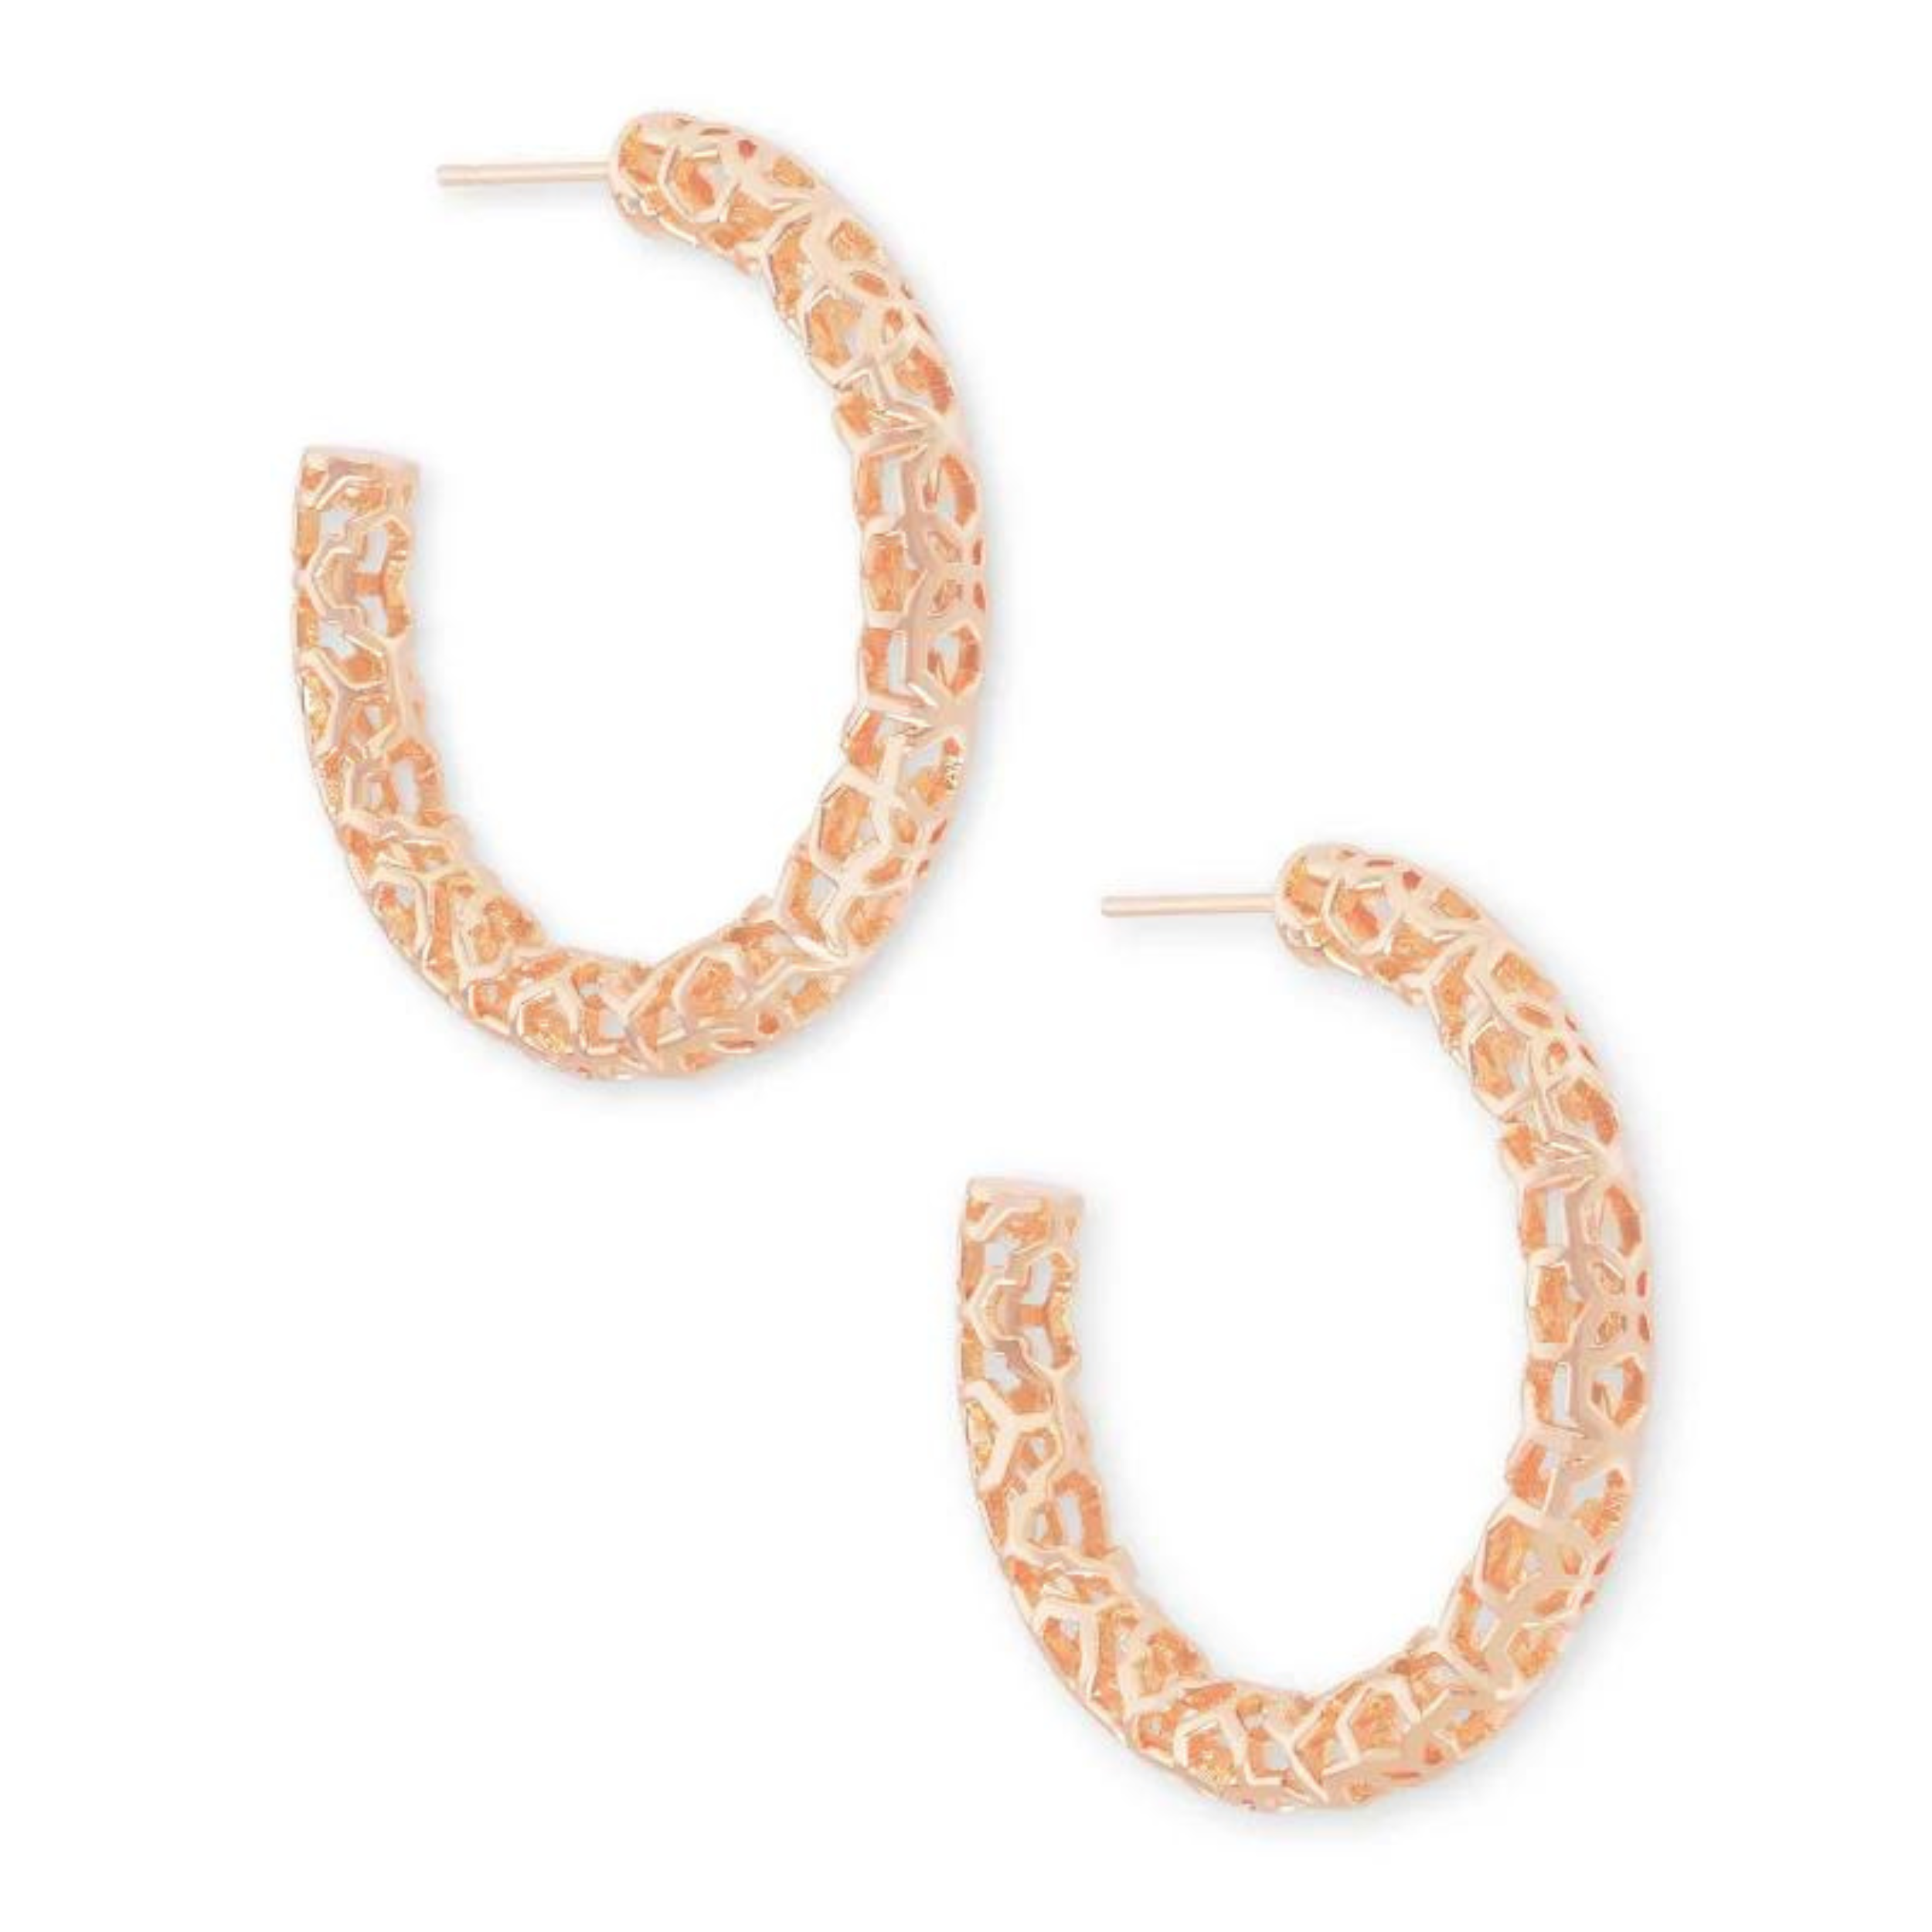 Rose gold hoops with filigree detailing, pictured on a white background.